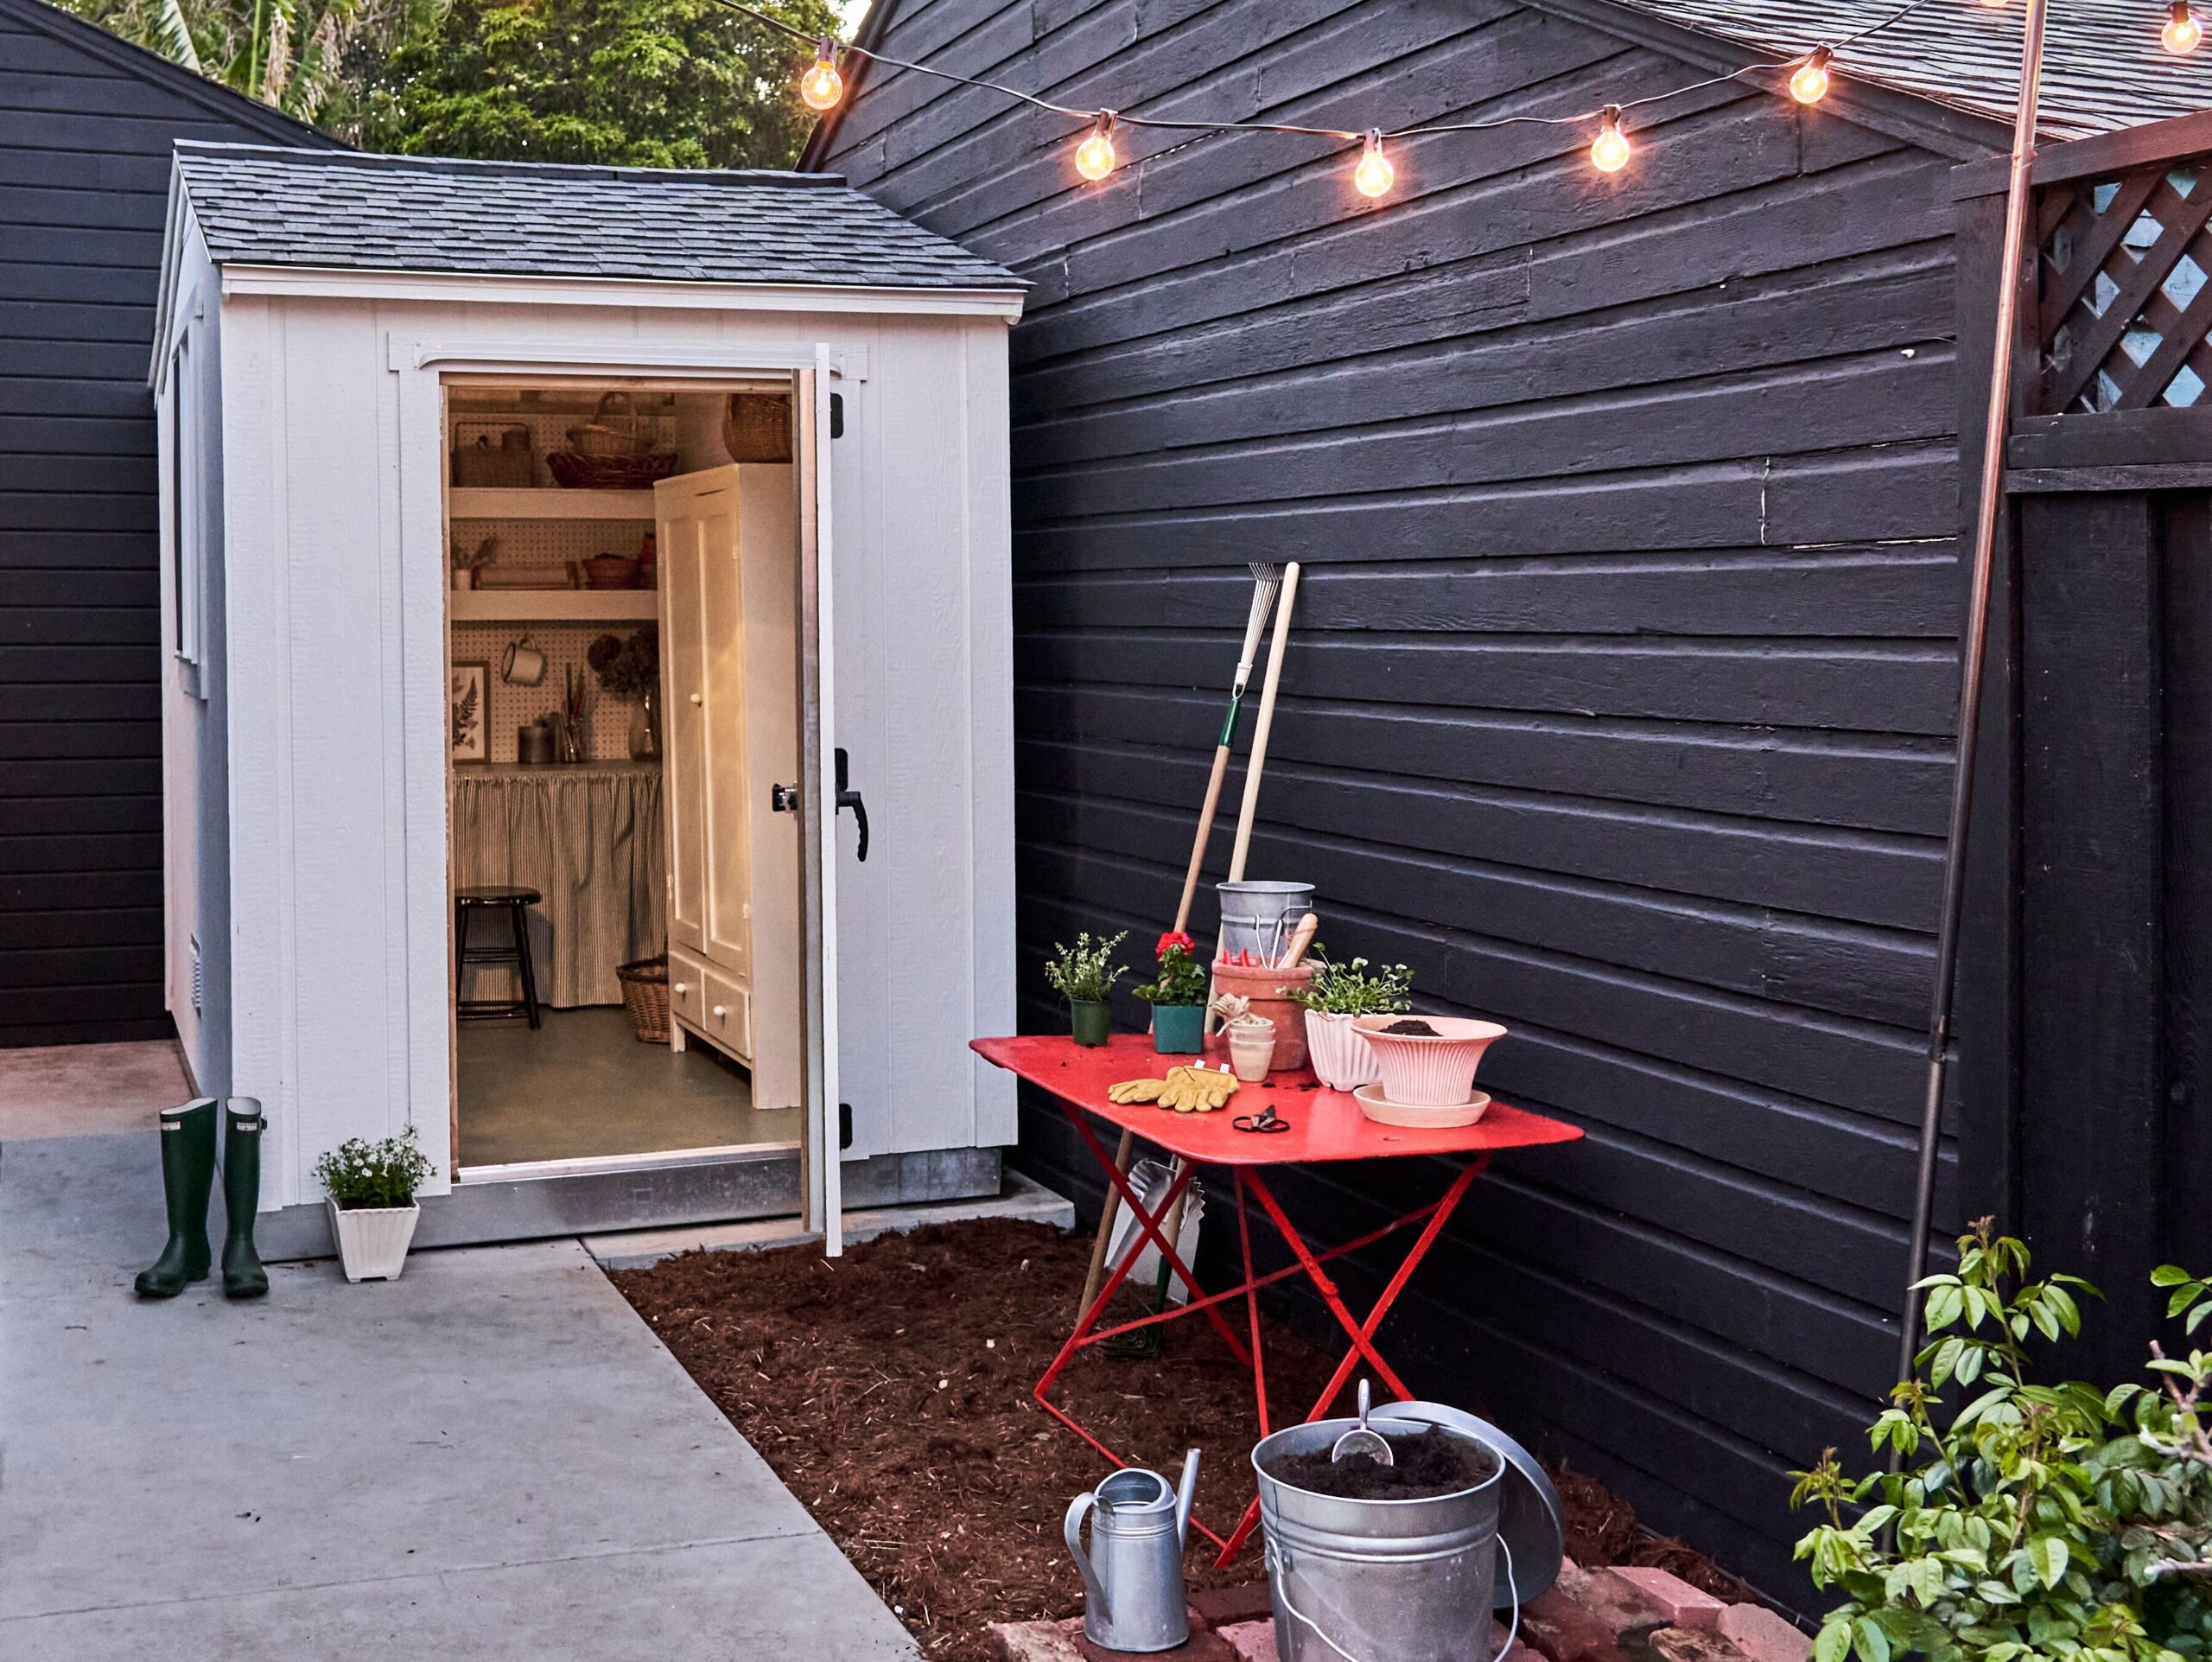 Side yard with small shed for potting plants